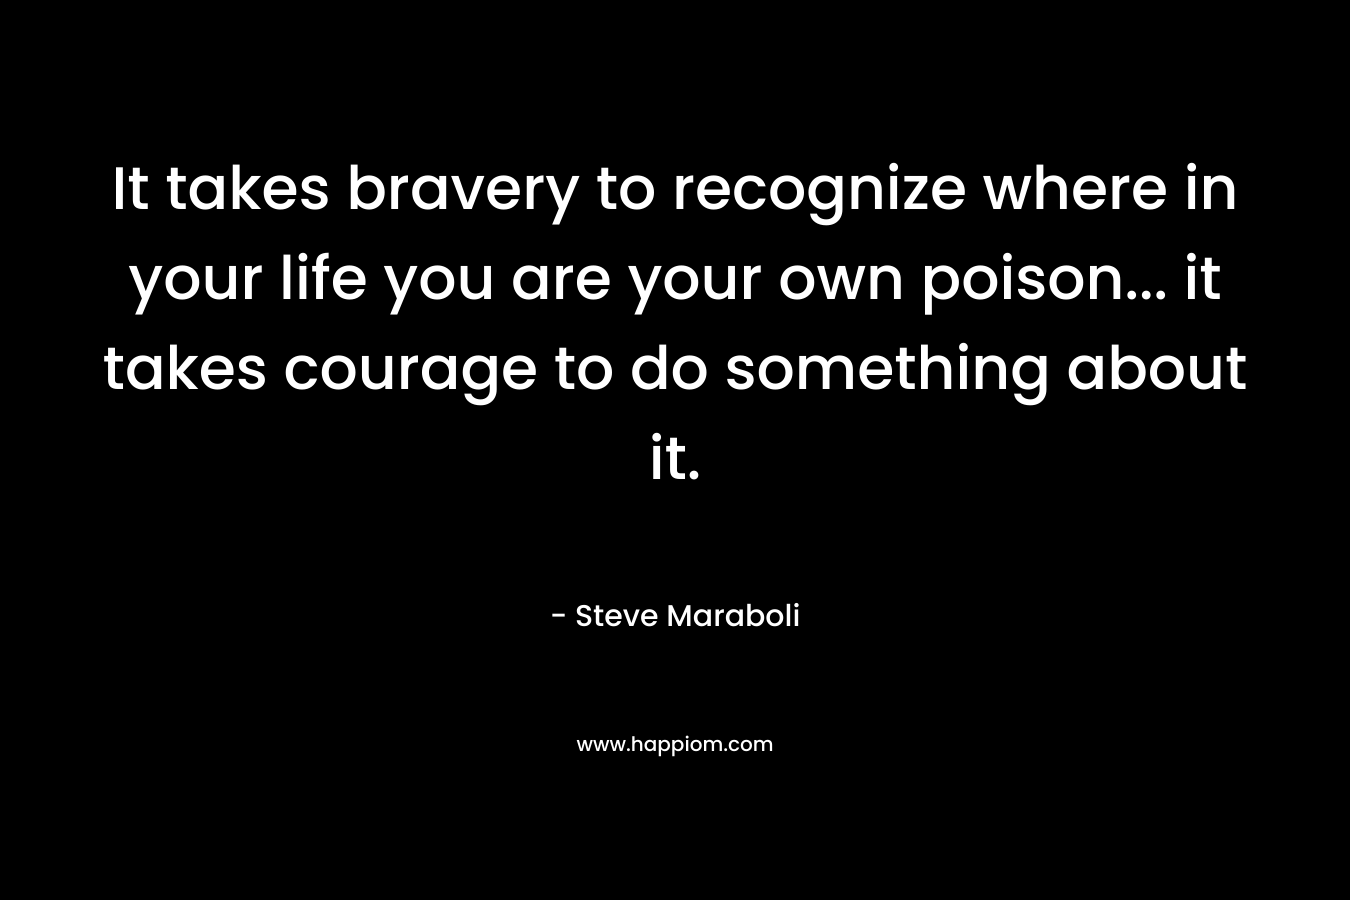 It takes bravery to recognize where in your life you are your own poison... it takes courage to do something about it.